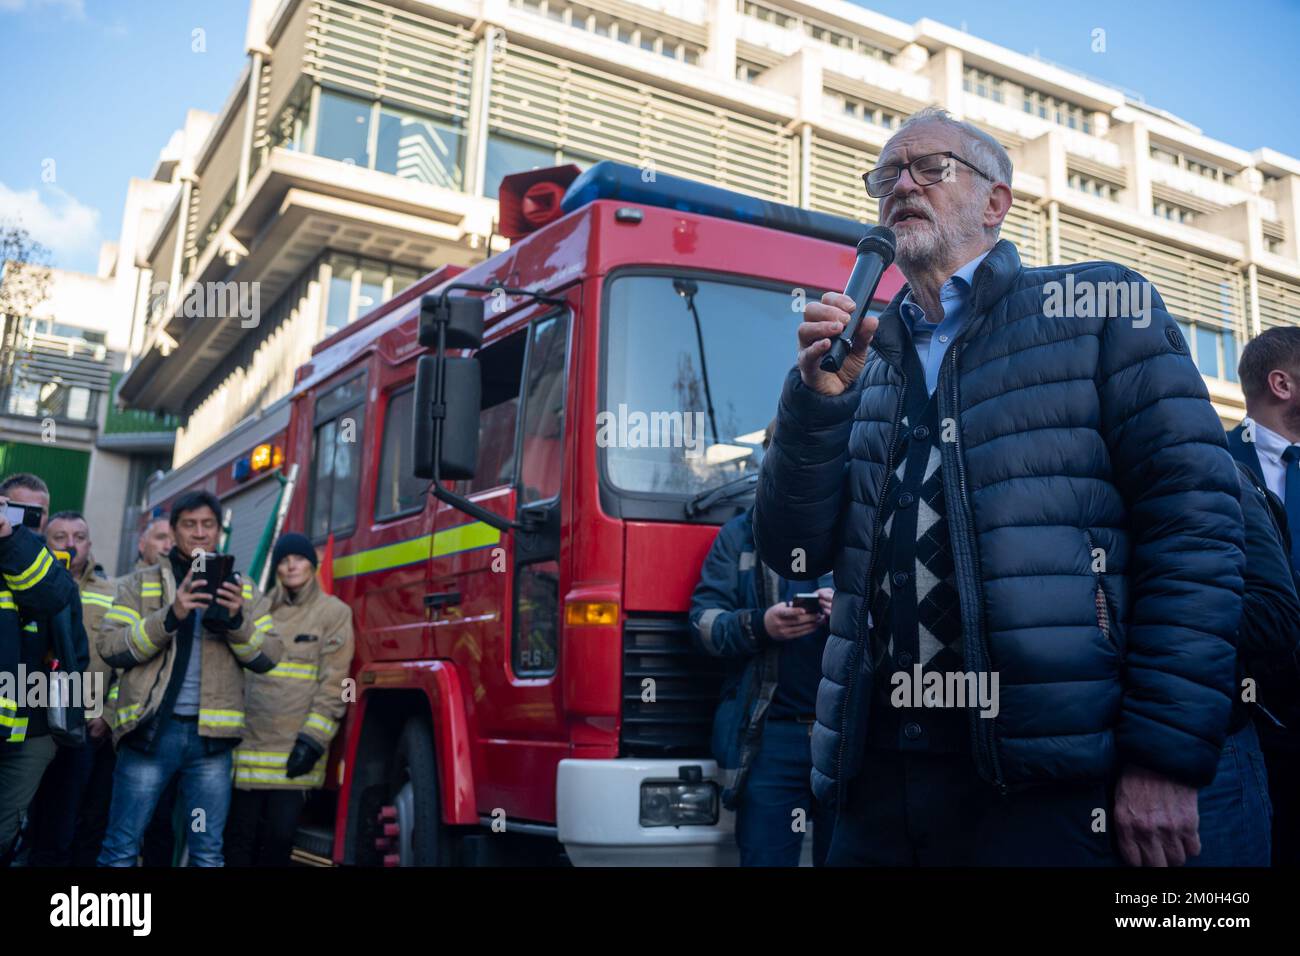 London/UK 06 Dec 2022. Fire brigade Union opened their strike ballot to their 32,000 members of firefighters and control staff. With a show of solidarity hundreds of firefighters then marched from their meeting to Houses of Parliament, demanding a fair pay rise.  Aubrey Fagon/Live Alamy News Stock Photo